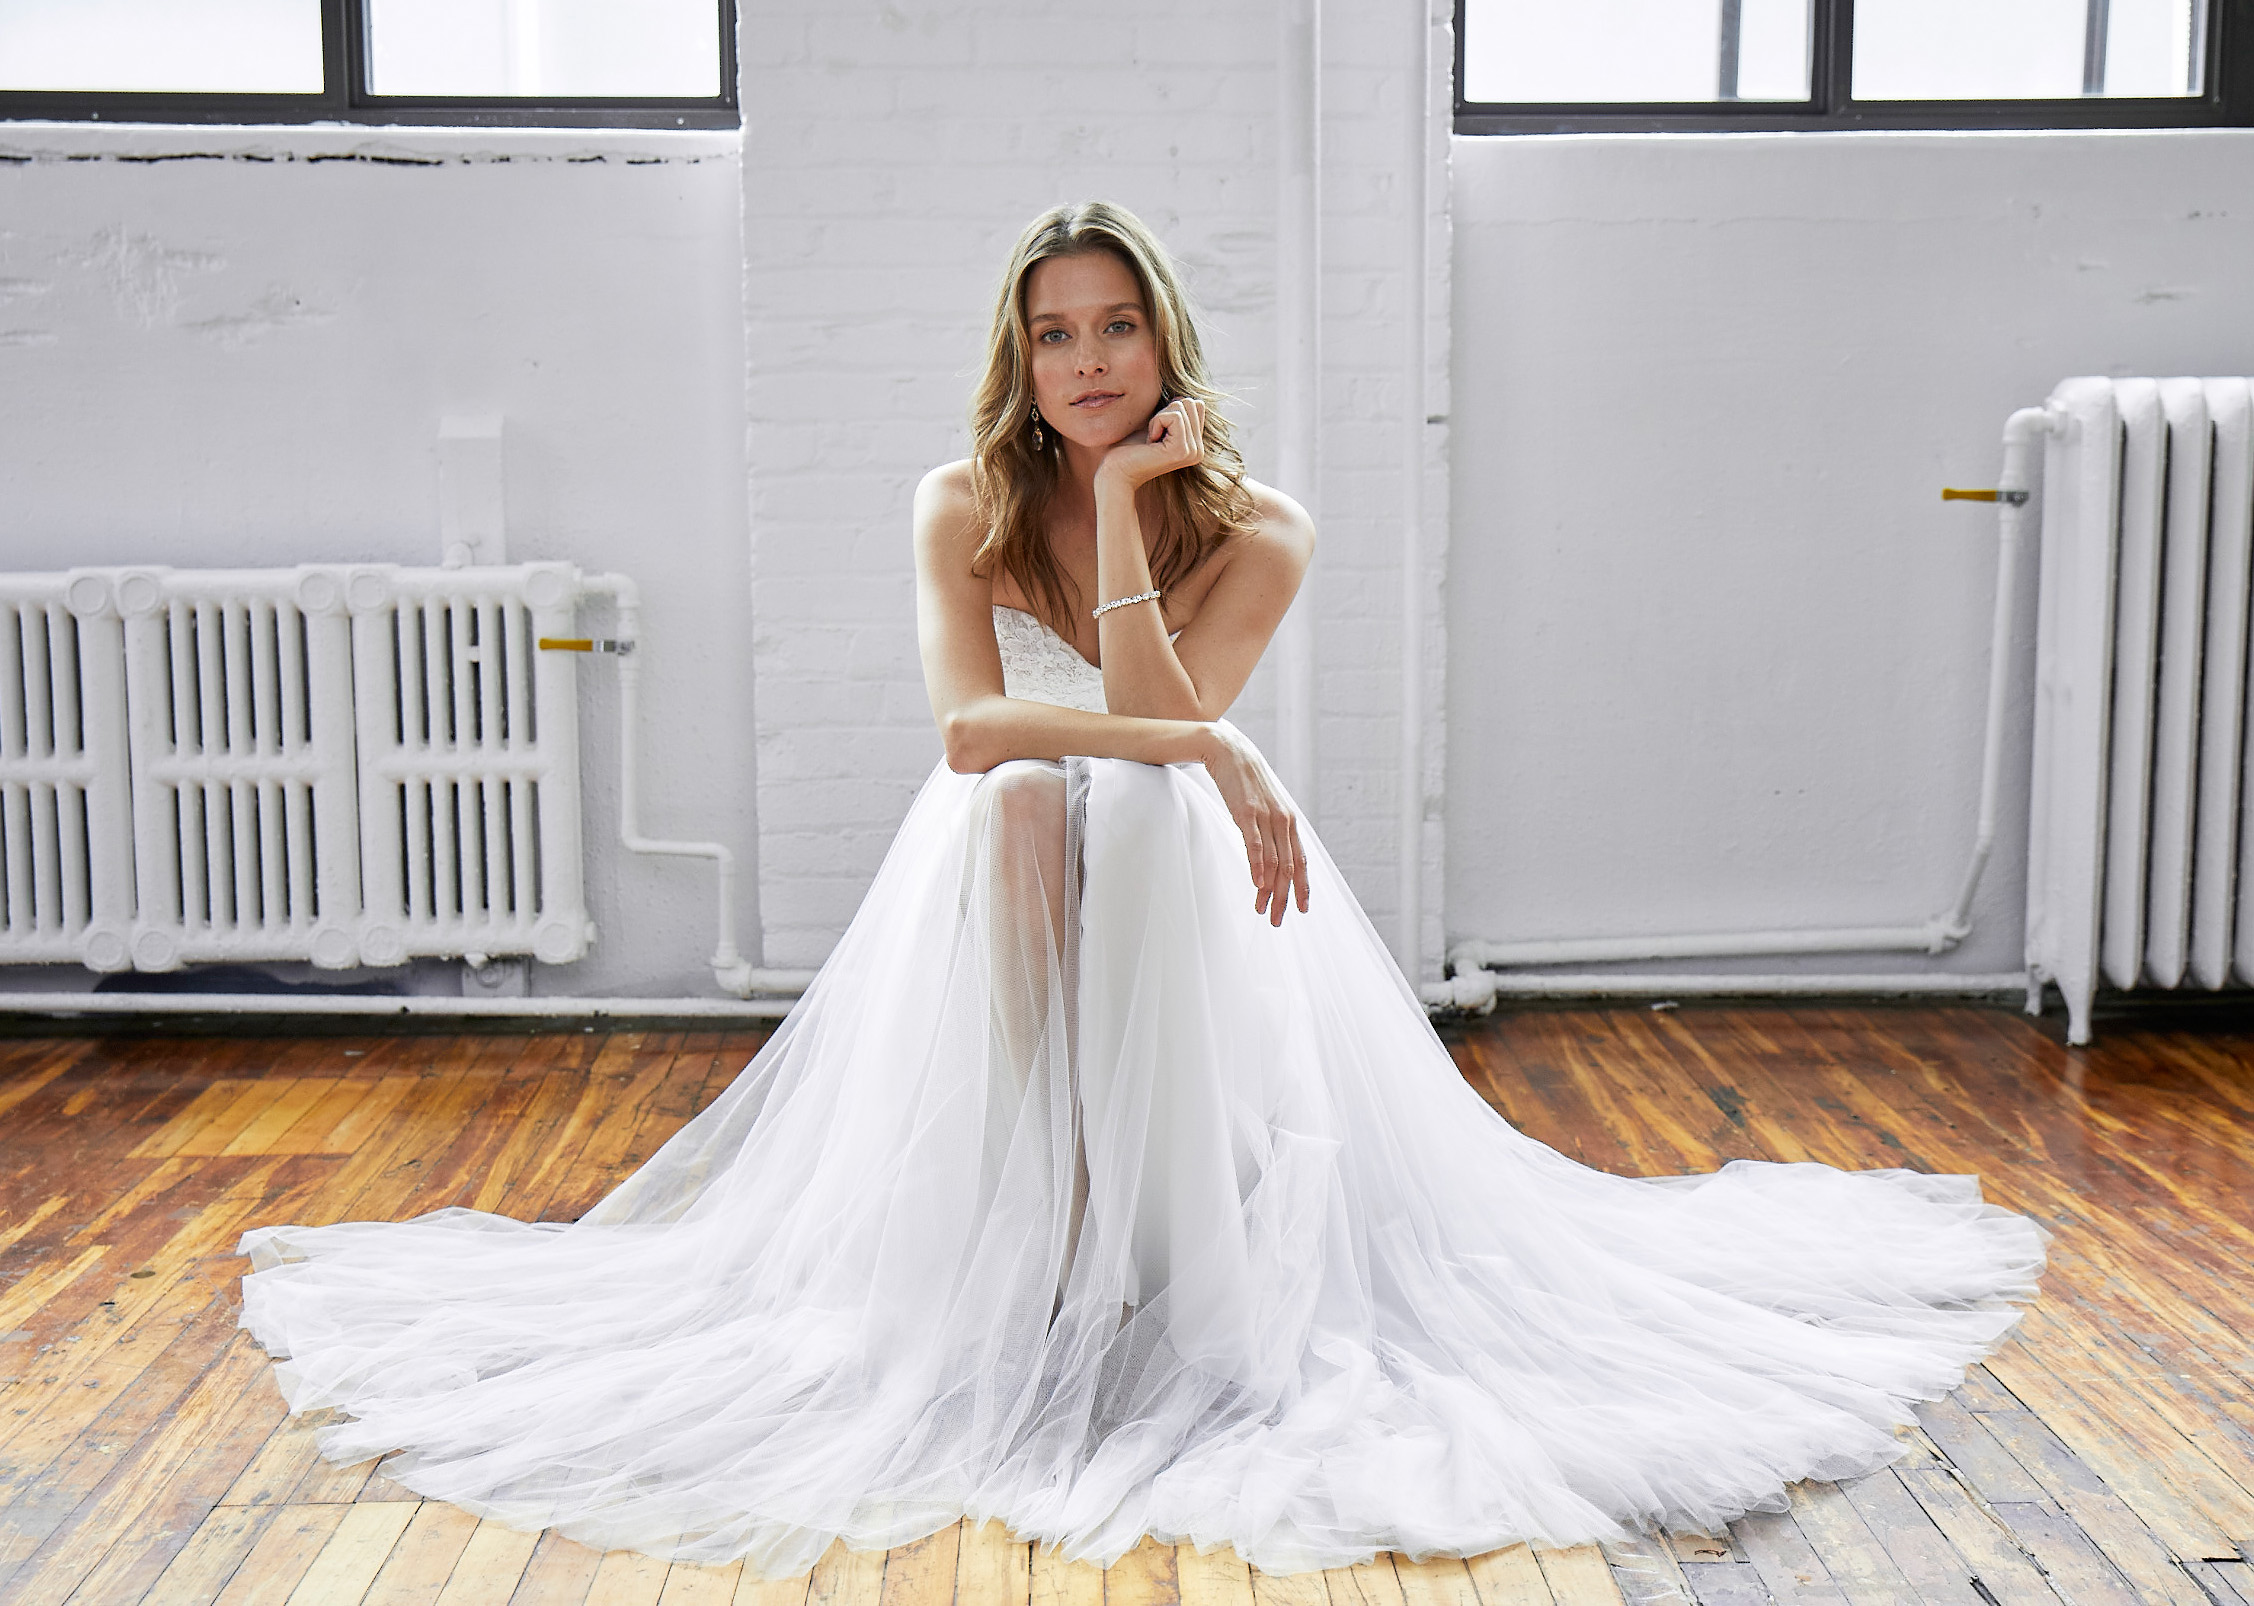 Meet Stardust | Astrid & Mercedes 2020 Bridal Collection Preview